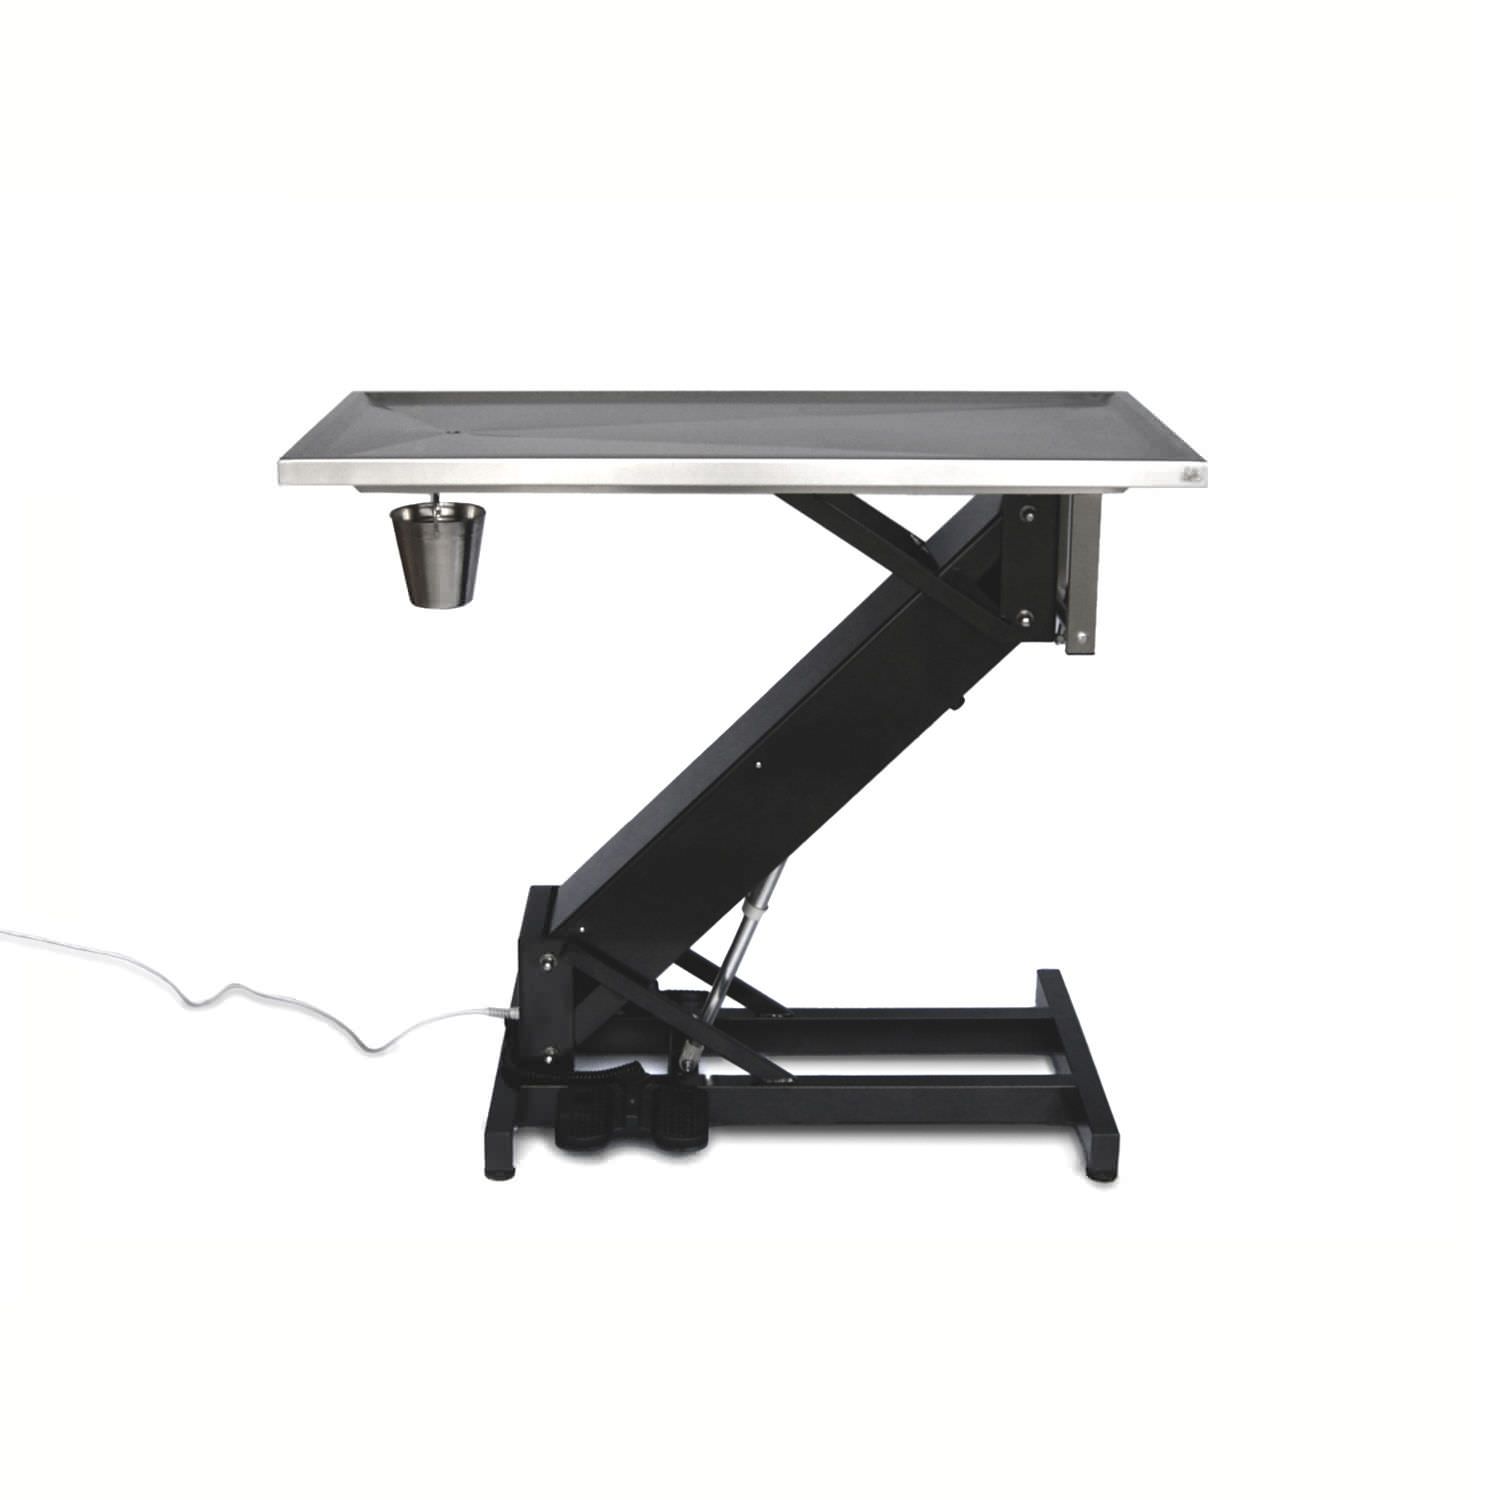 Veterinary operating table / electrical / lifting 2.05.010 Lubb